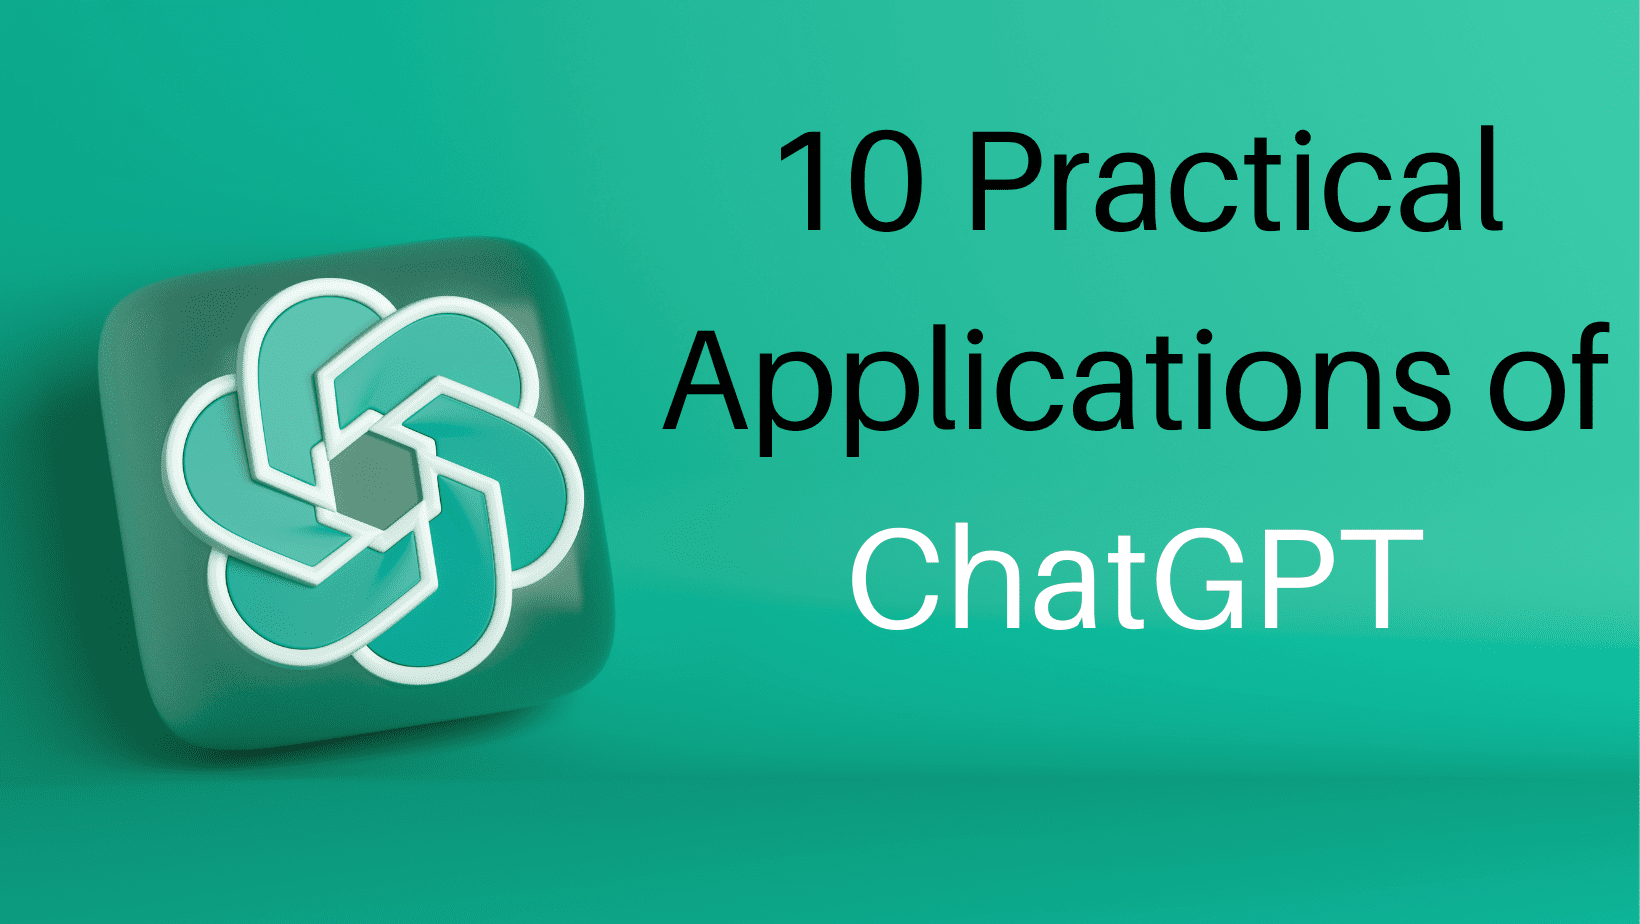 10 Practical Applications of ChatGPT